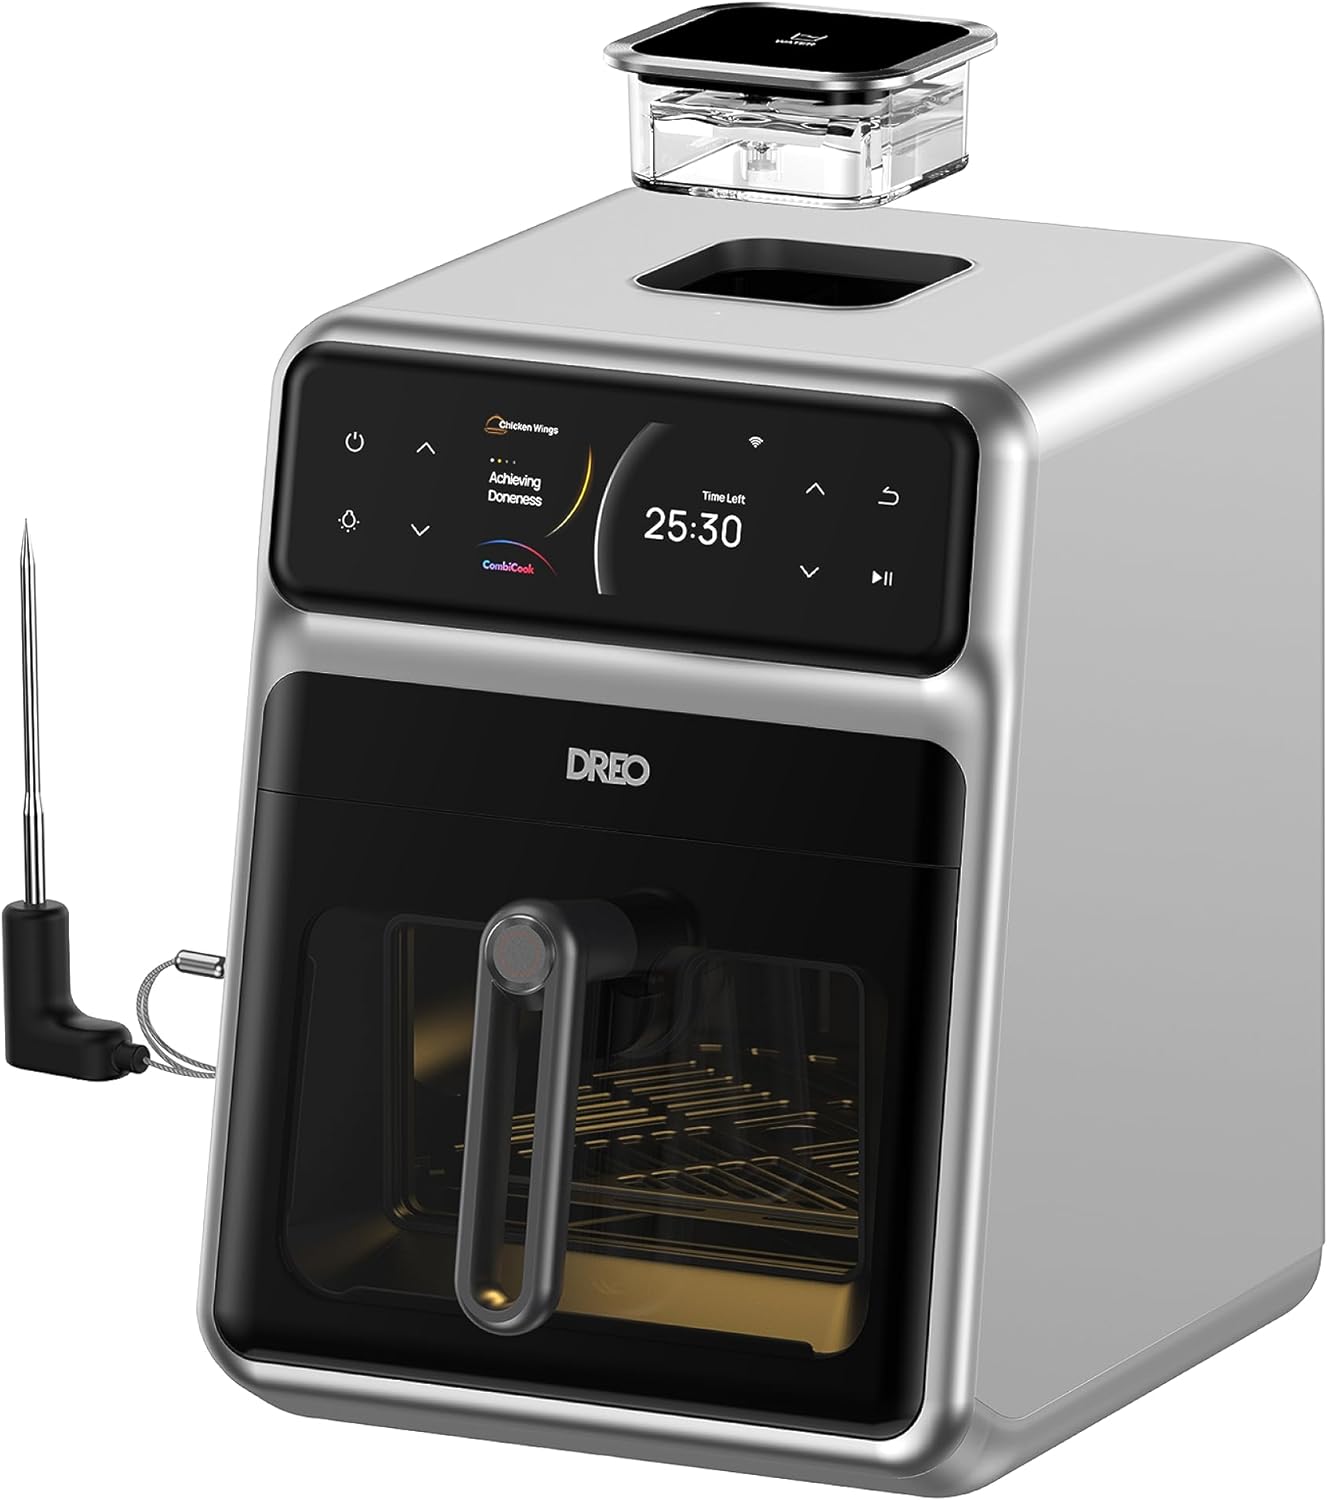 Read more about the article Dreo ChefMaker Combi Fryer, Smart Air Fryer Cooker with Cook probe, Water Atomizer, 3 professional cooking modes, 6 QT for ONLY $279.00 (Was $359.00)